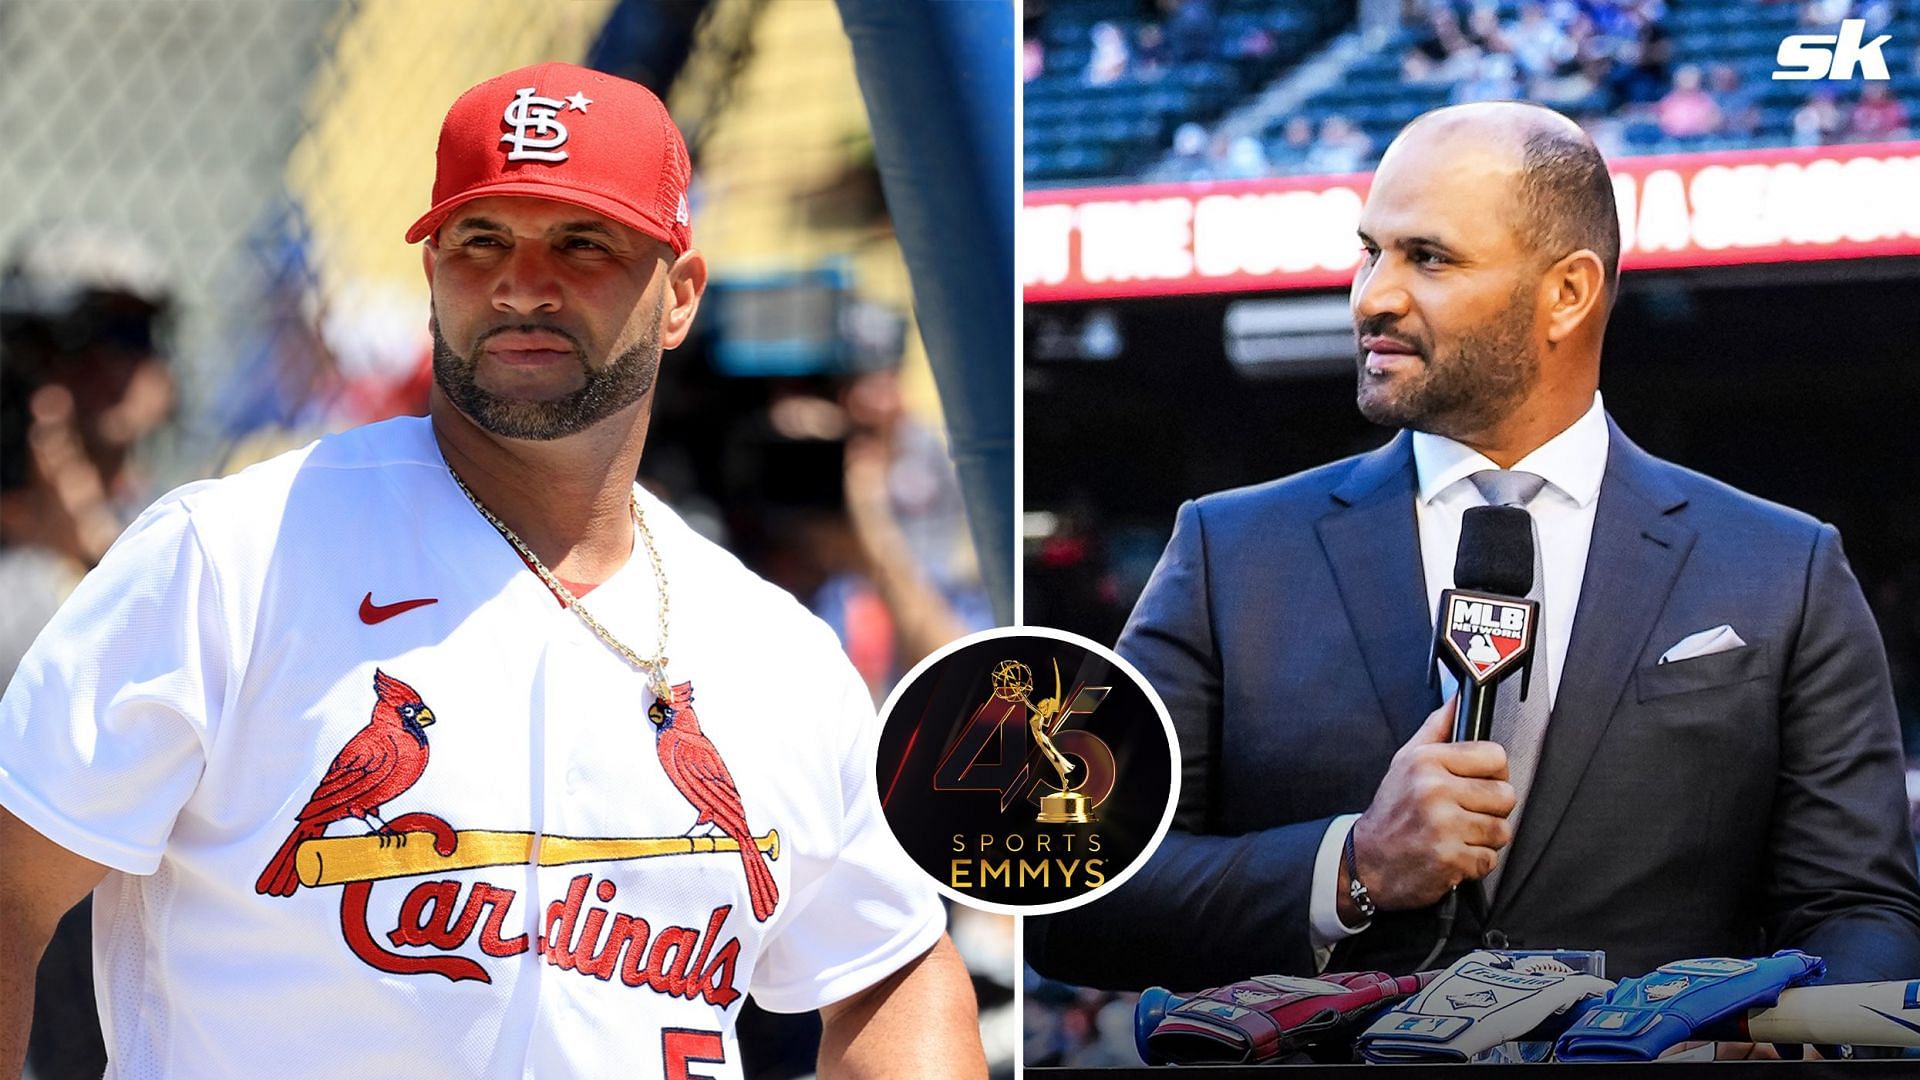 Albert Pujols wins the Sports Emmy for his show| Photo: @thesportsemmys, @albertpujols/INSTAGRAM